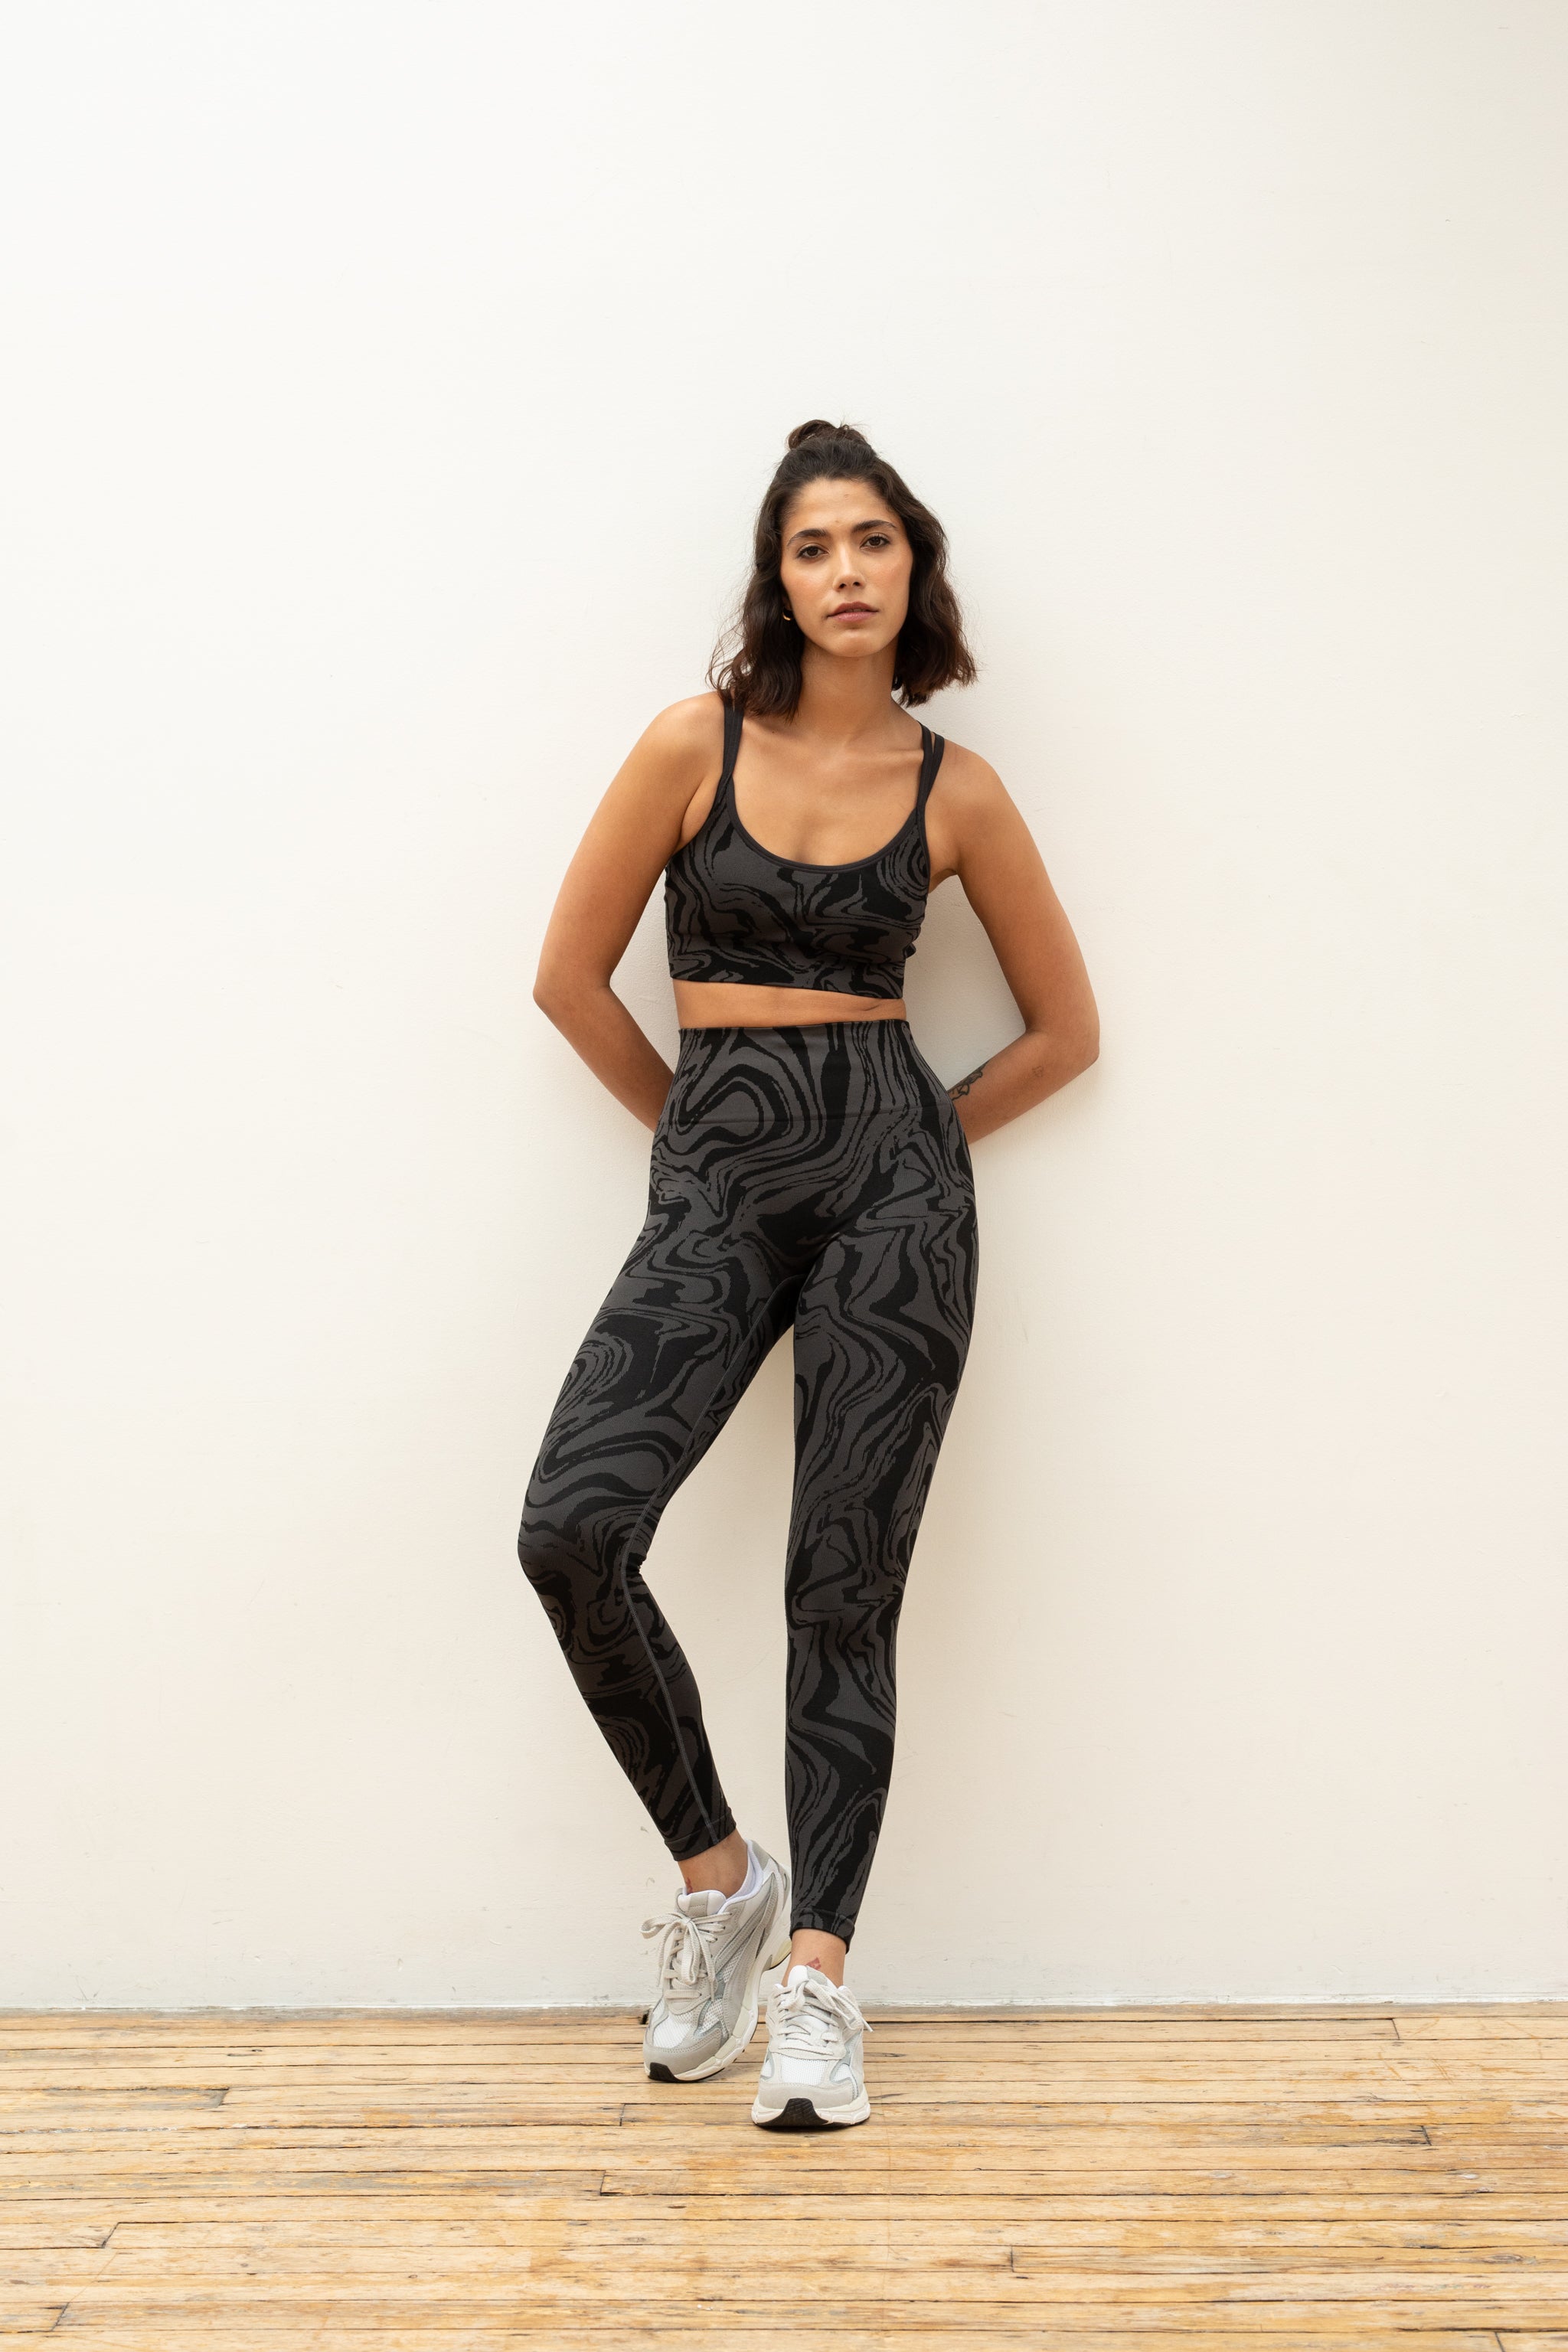 Black and grey jacquard marble effect supportive sports bra with high waisted leggings by sustainable women's activewear brand, Jilla.